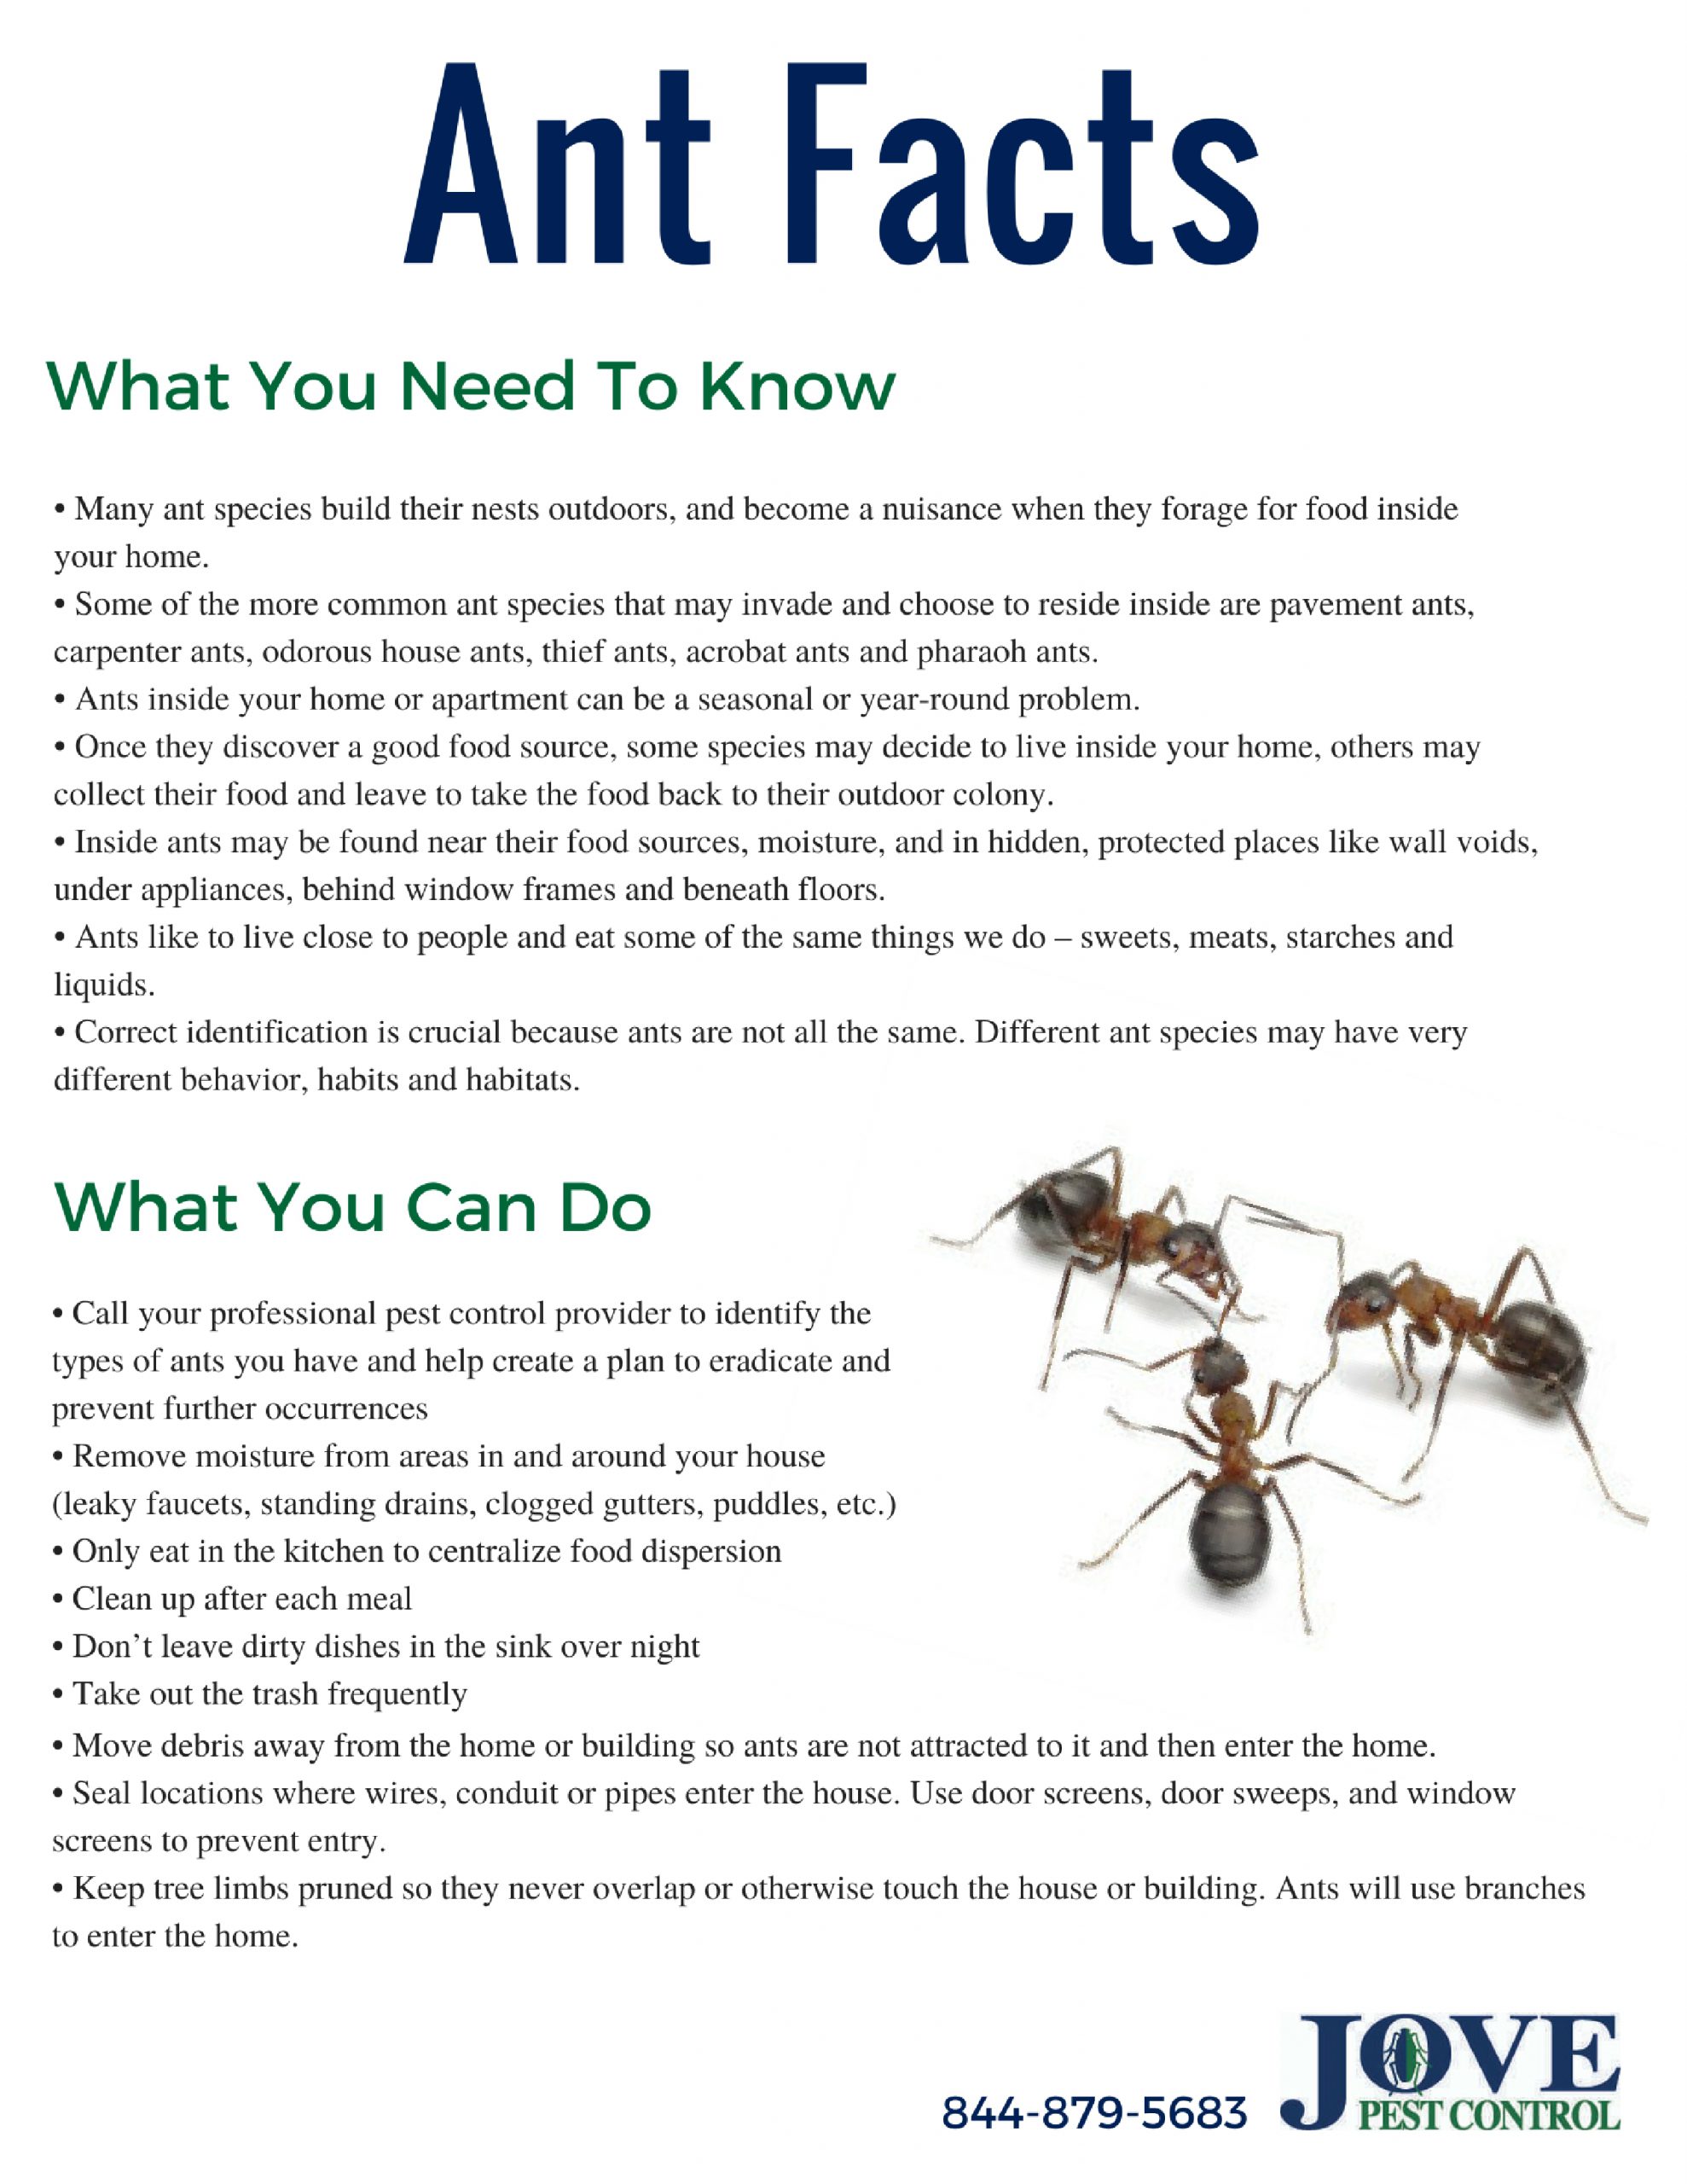 Ant Facts & Prevention